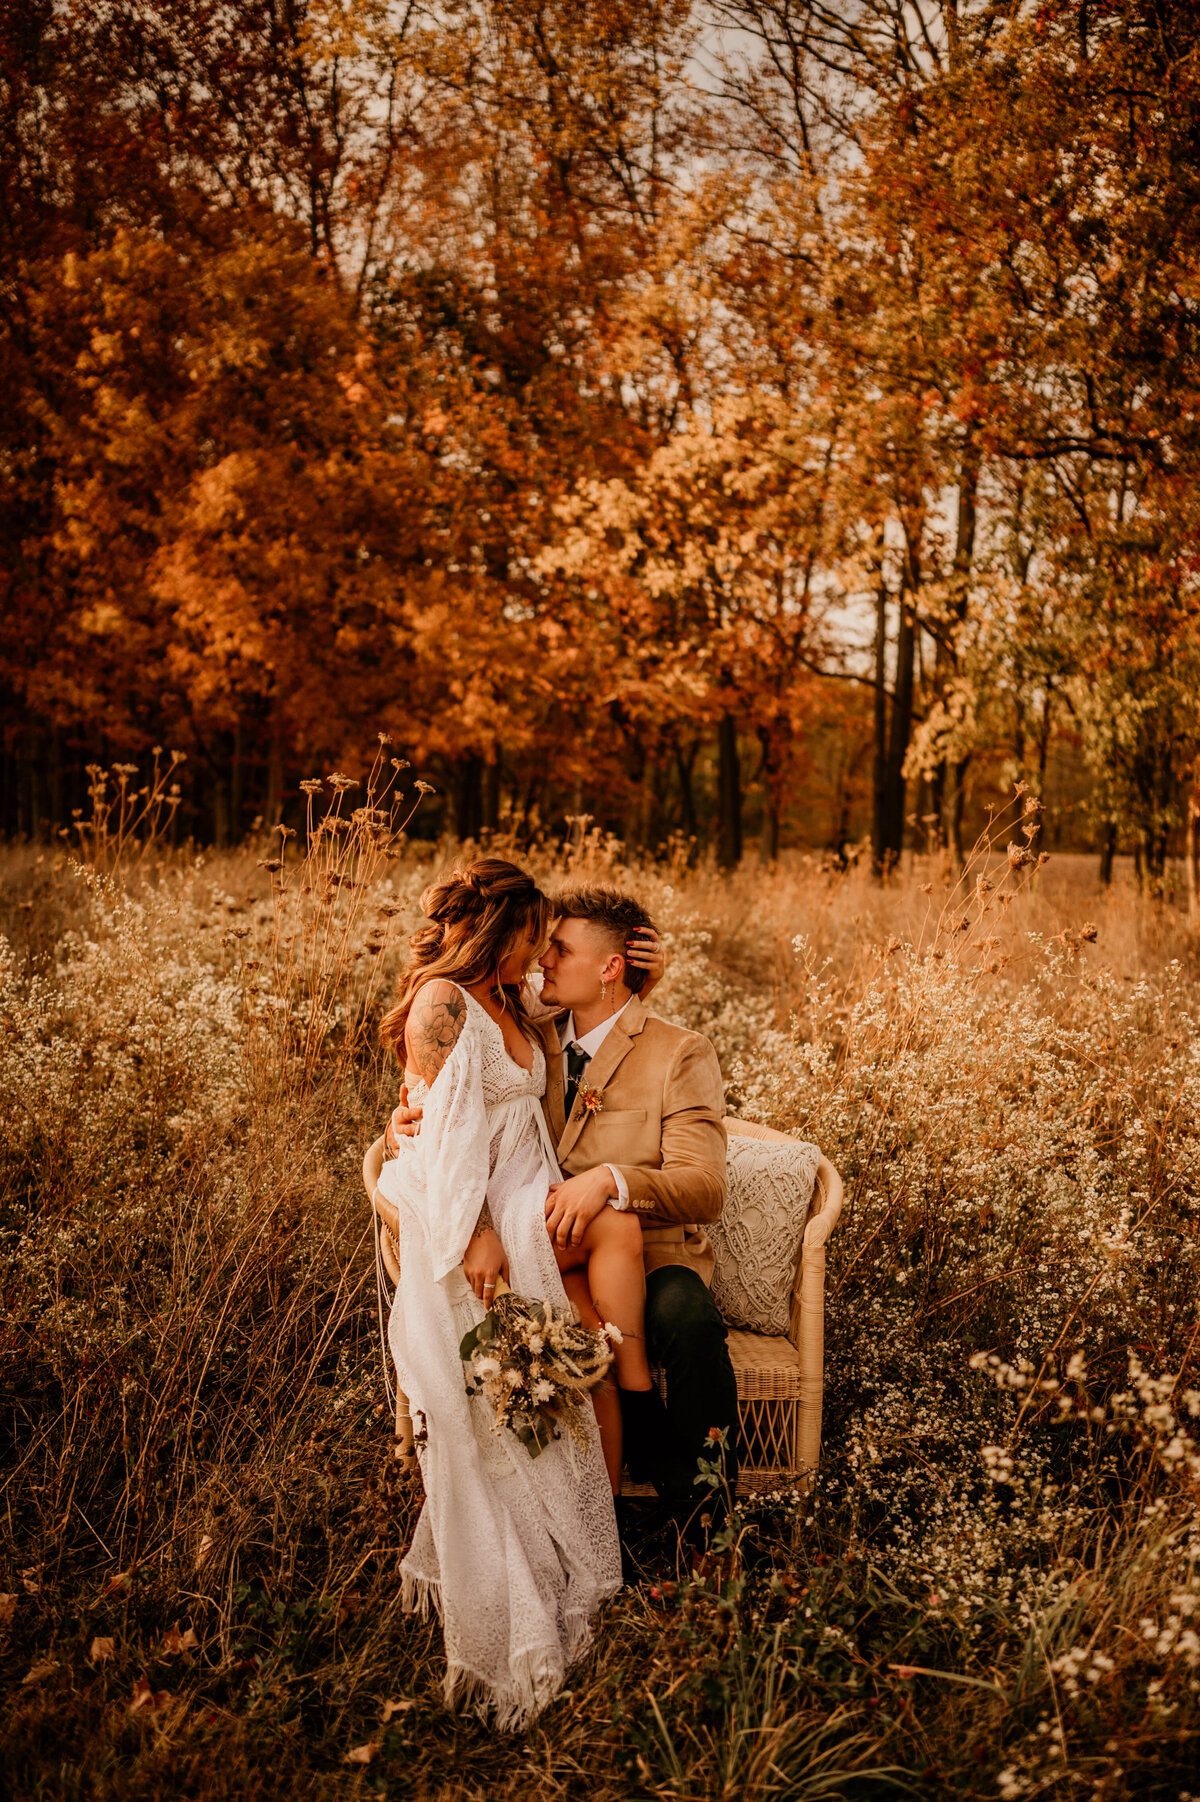 styled wedding shoot in indianapolis 41